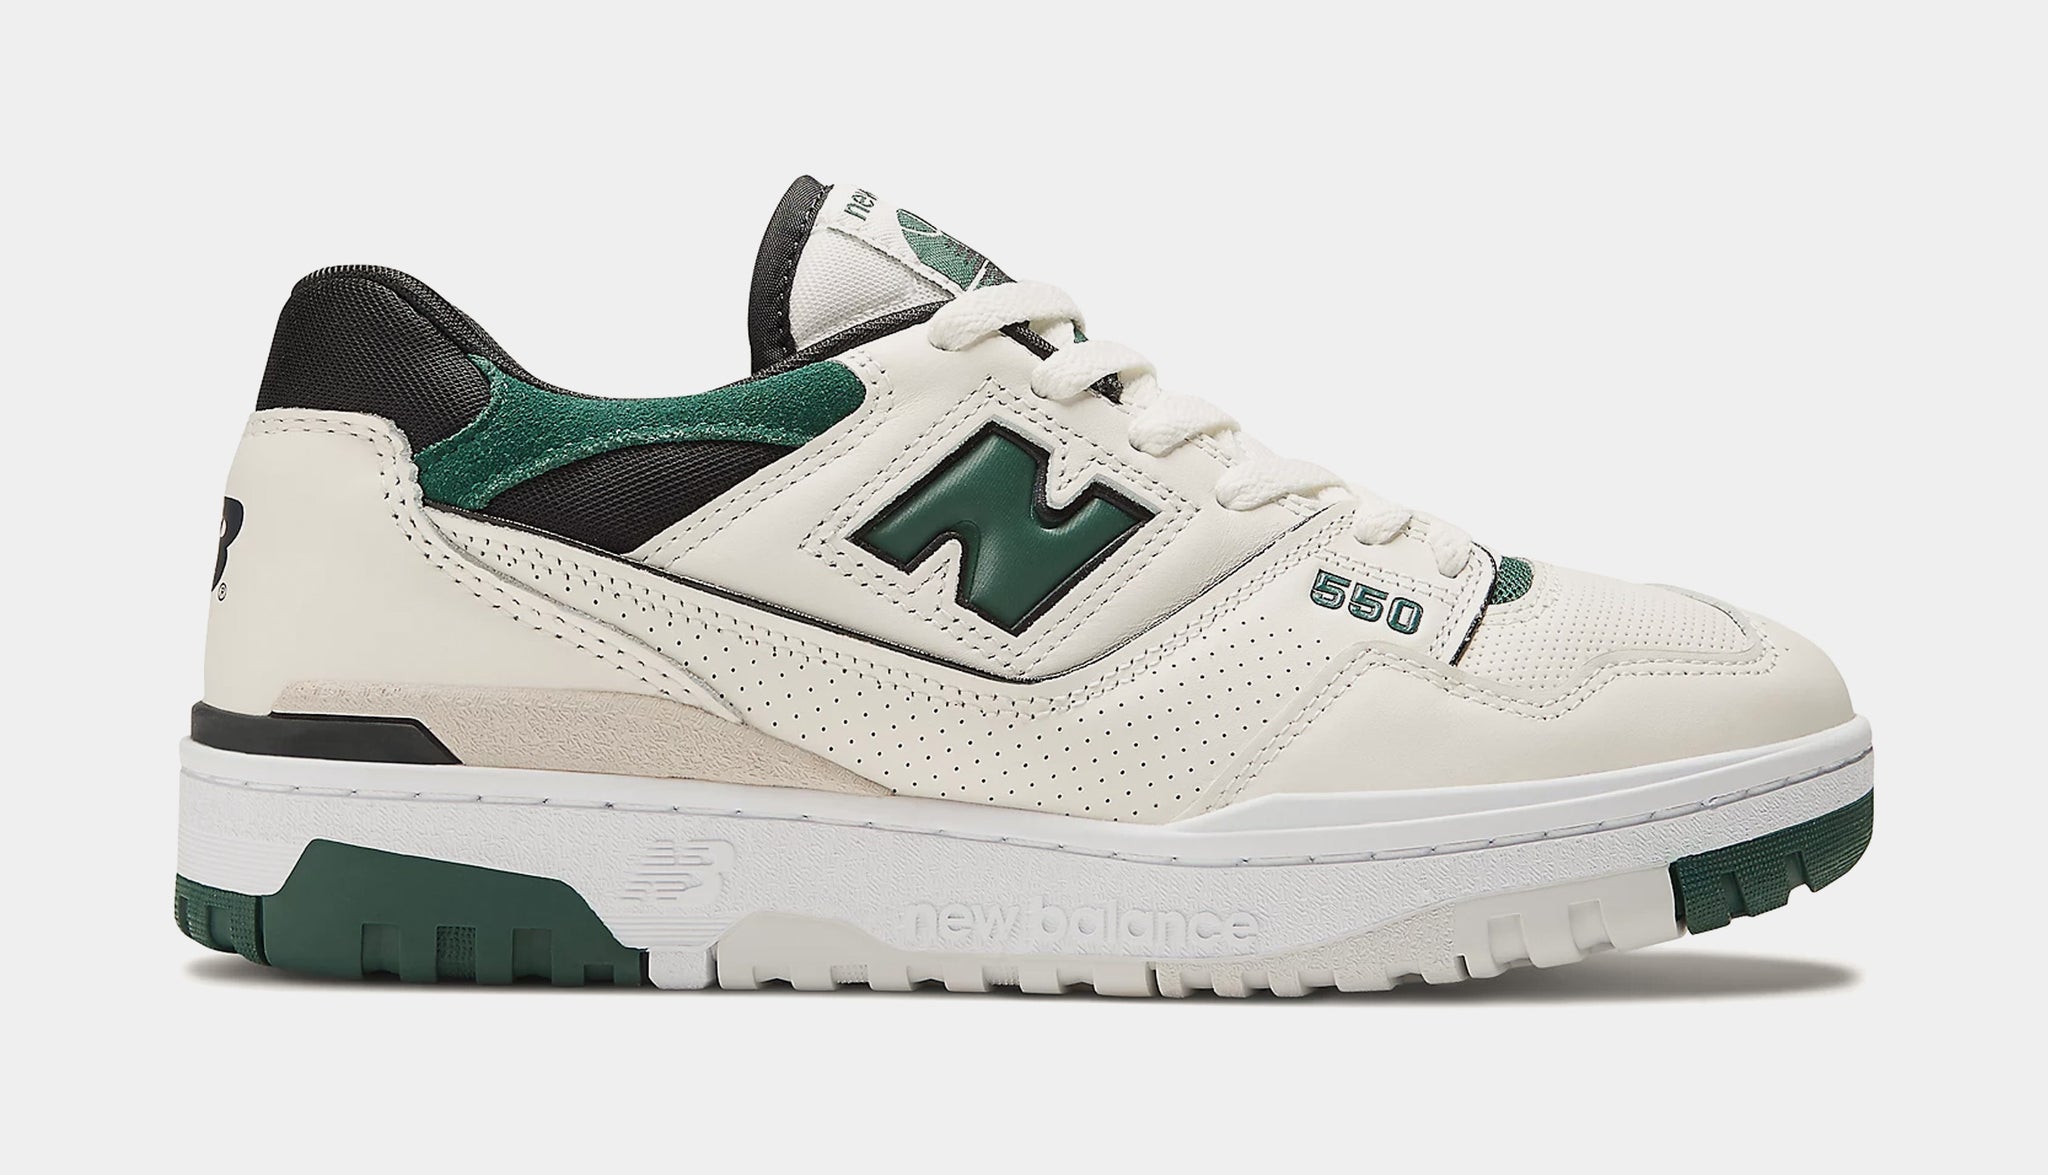 New Balance 550 White/Green Sneakers